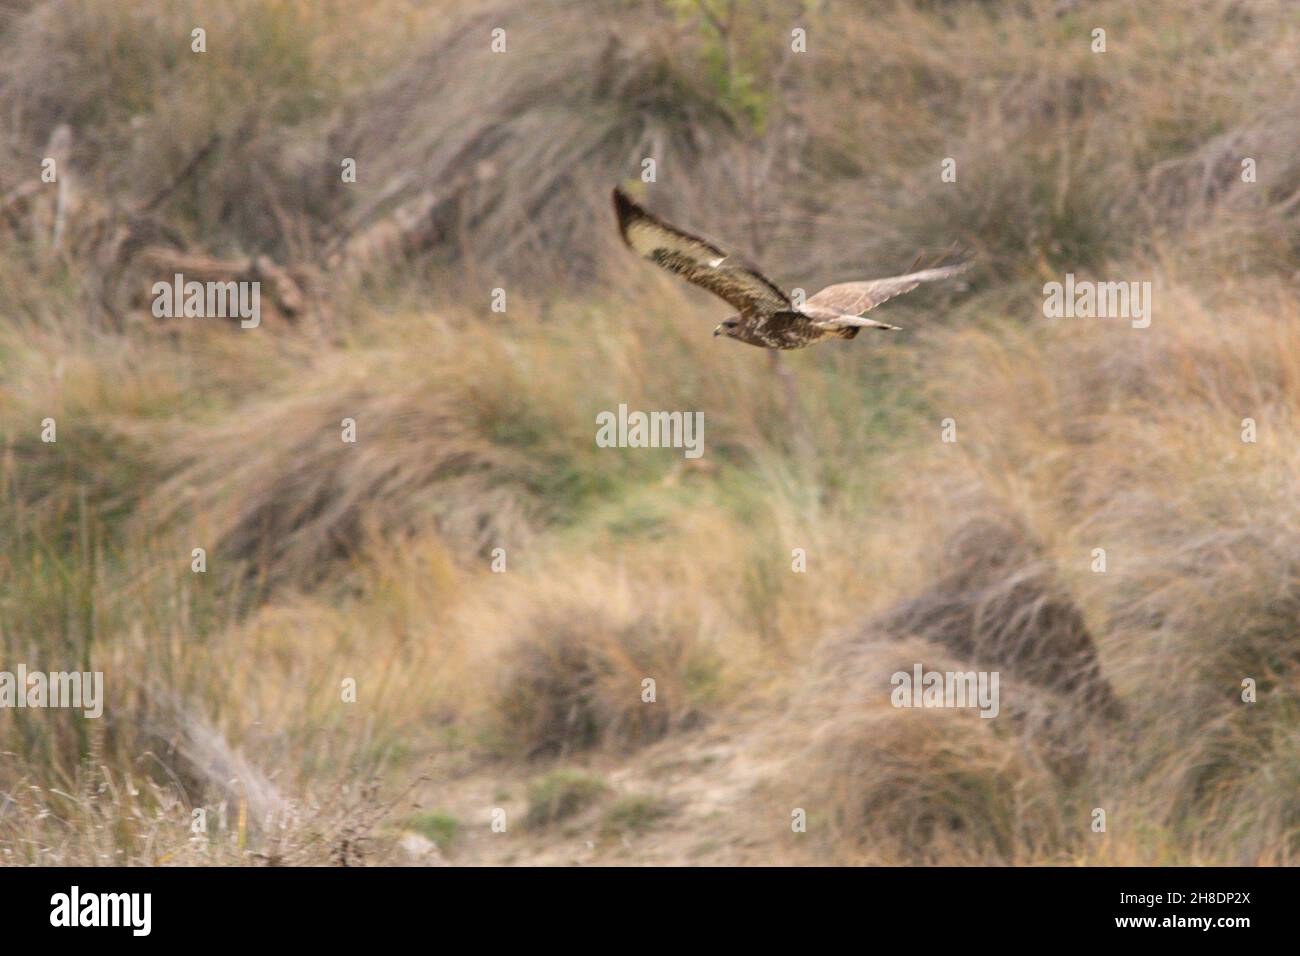 Circus aeruginosus - The western marsh harrier is a species of accipitriform bird in the Accipitridae family. Stock Photo